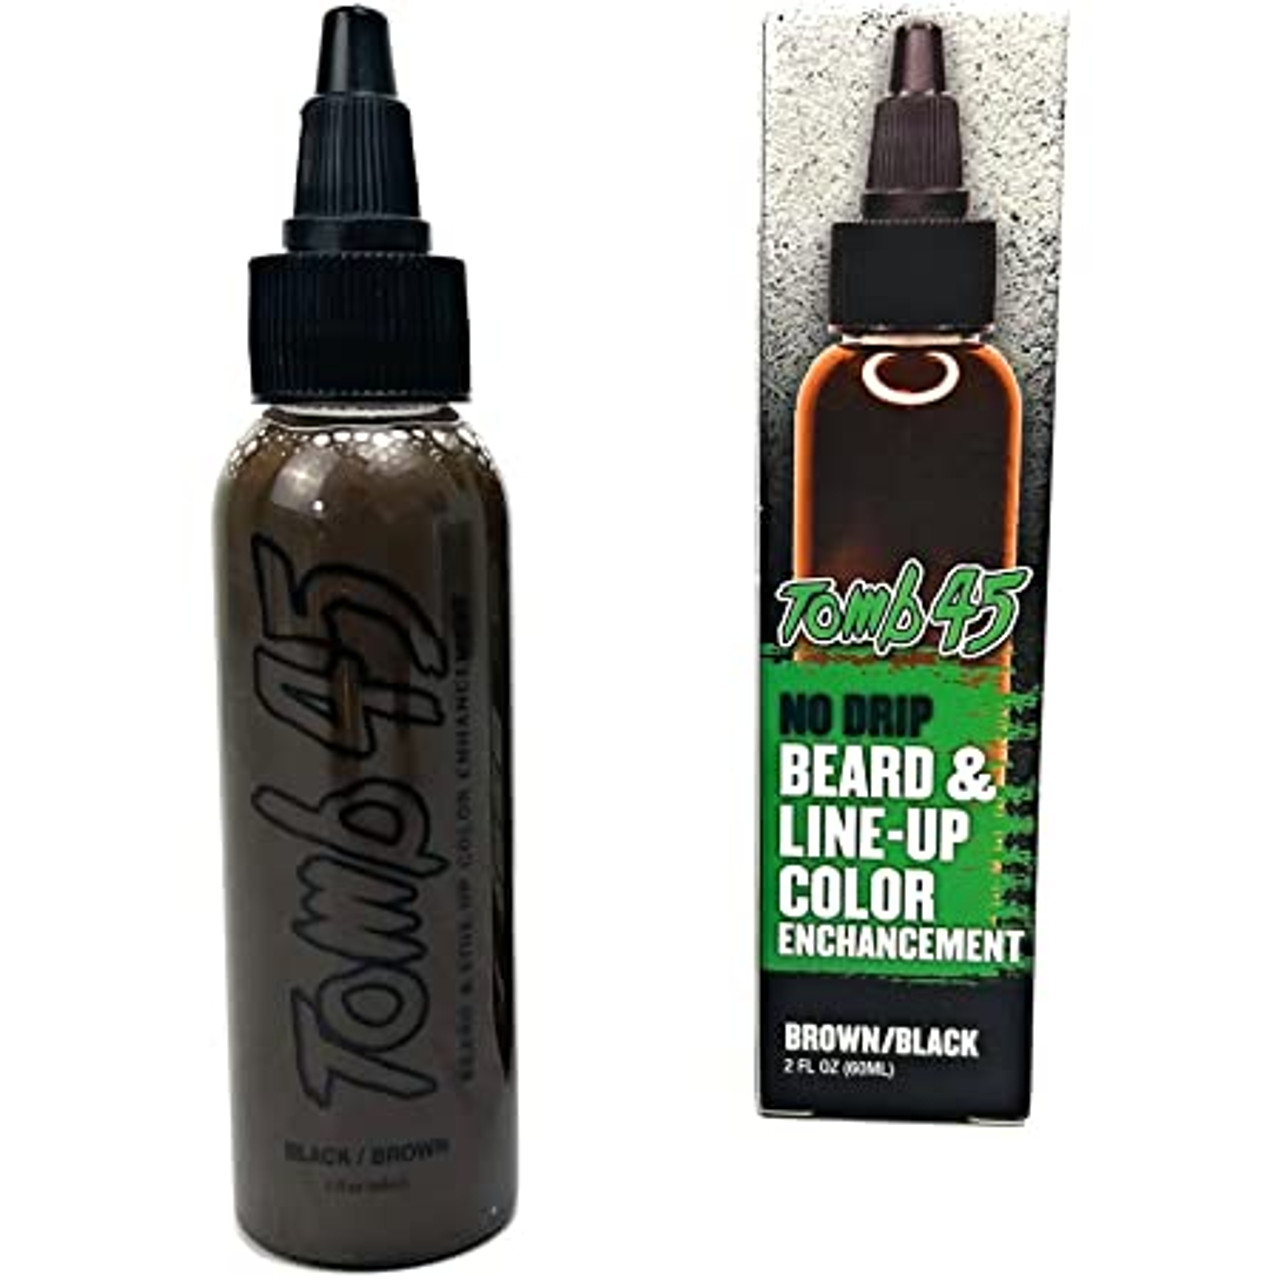 Tomb45 Beard & Line up Color Enhancement Brown - My Salon Express Barber  and Salon Supply